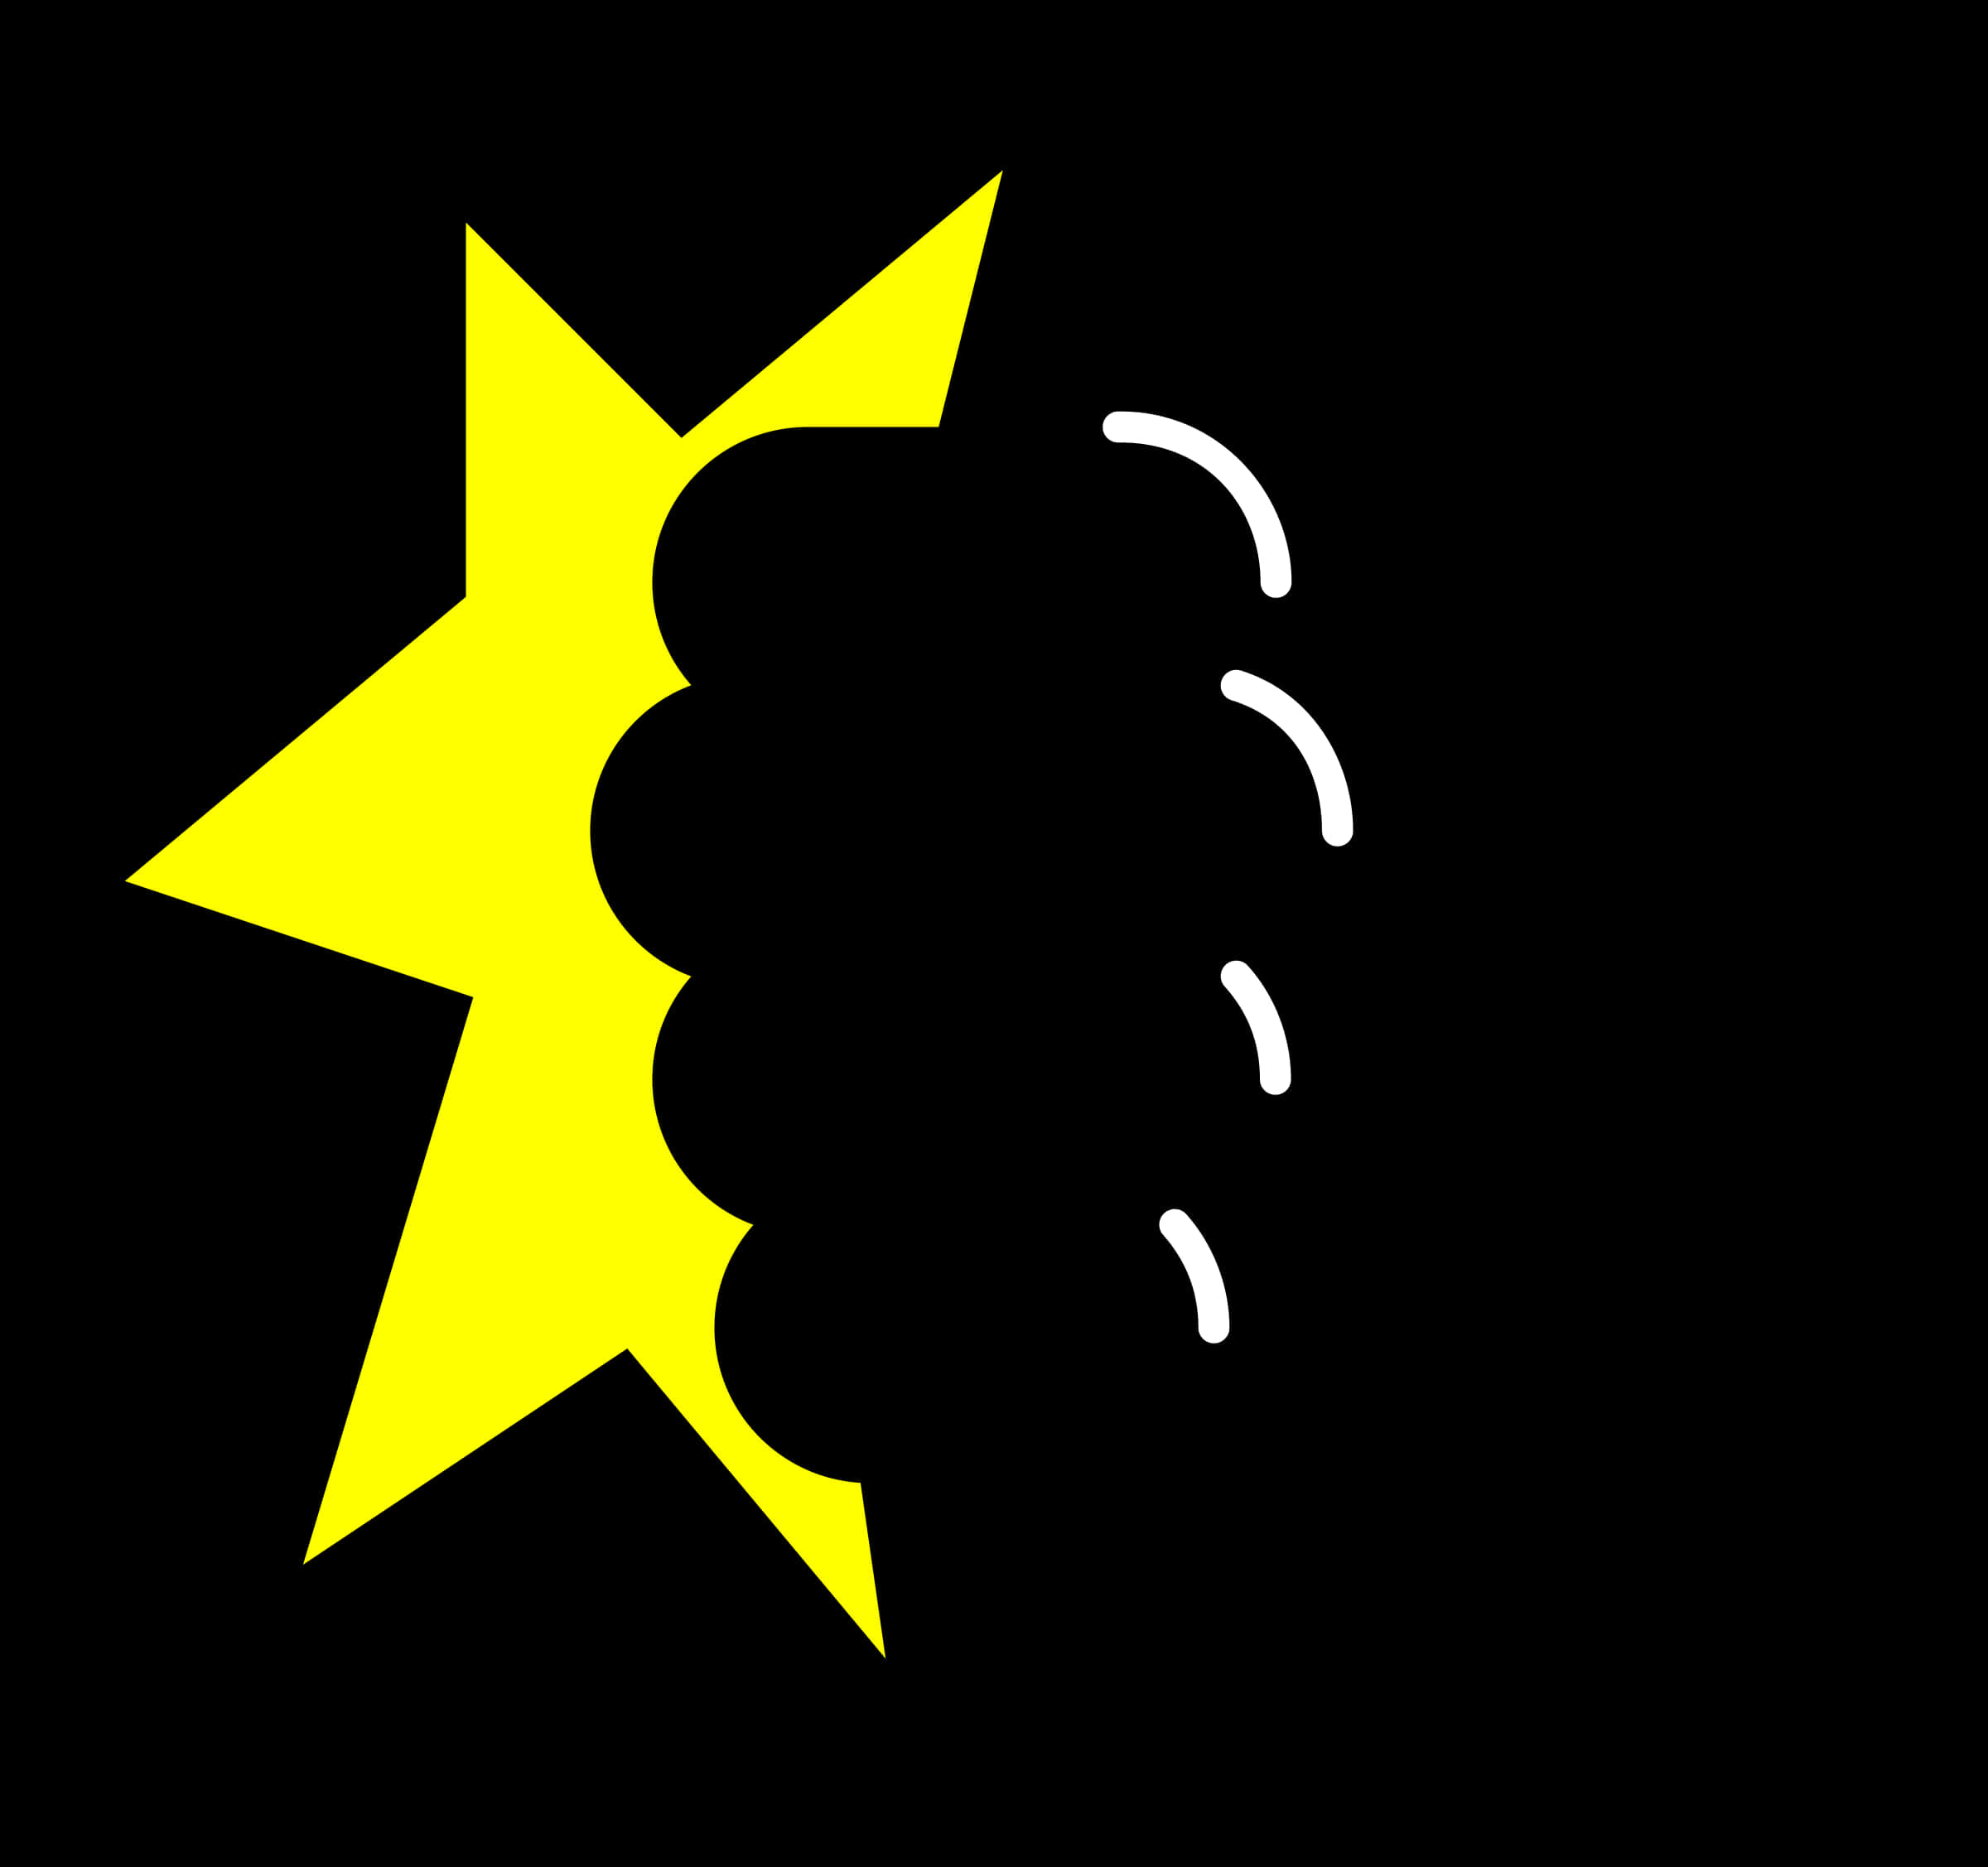 A Yellow And White Star With A Fist